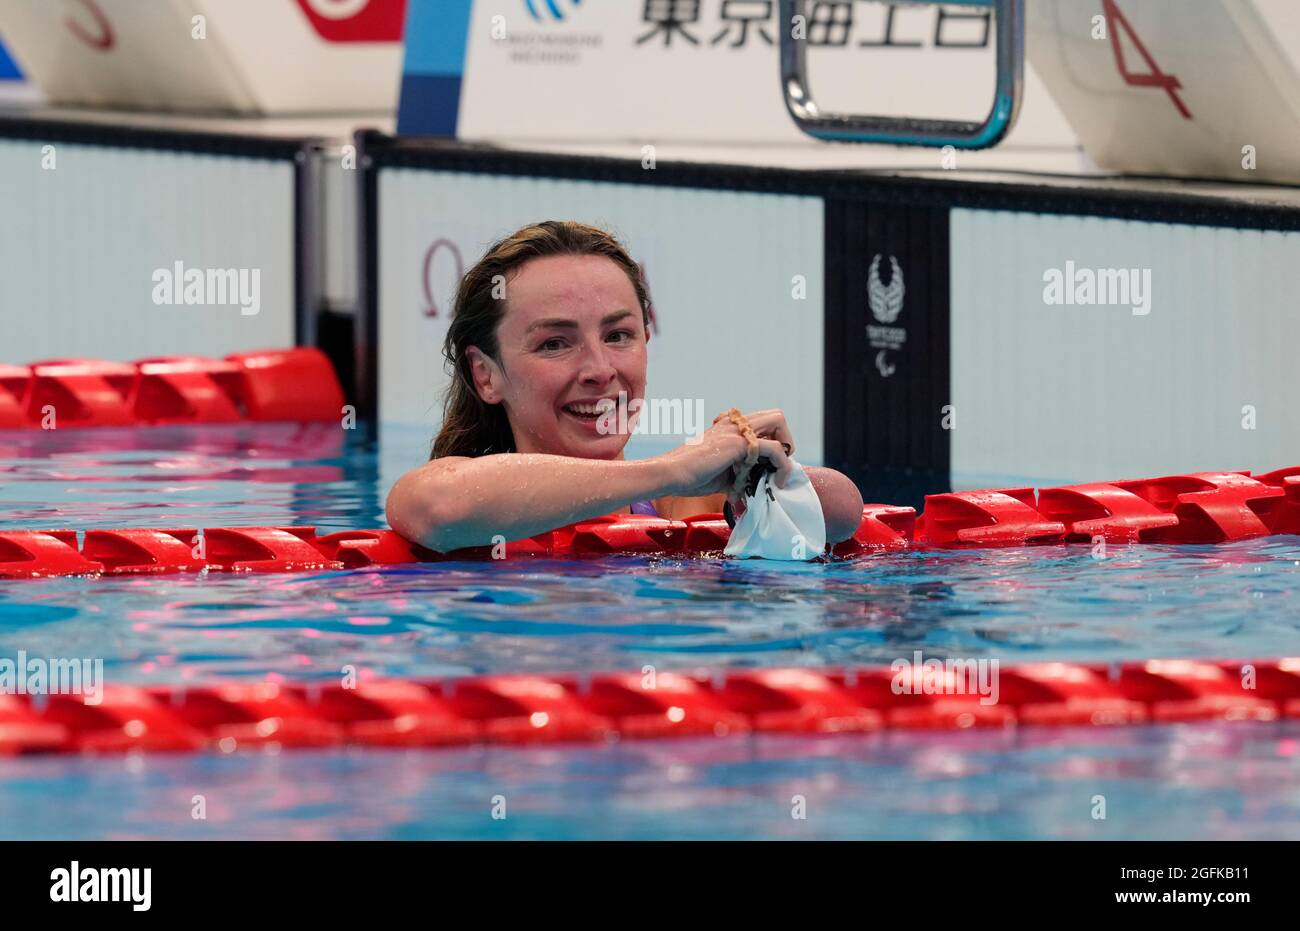 August 26, 2021: Ellen Keane from Ireland winning gold during swimming at the Tokyo Paraolympics, Tokyo aquatic centre, Tokyo, Japan. Kim Price/CSM Stock Photo